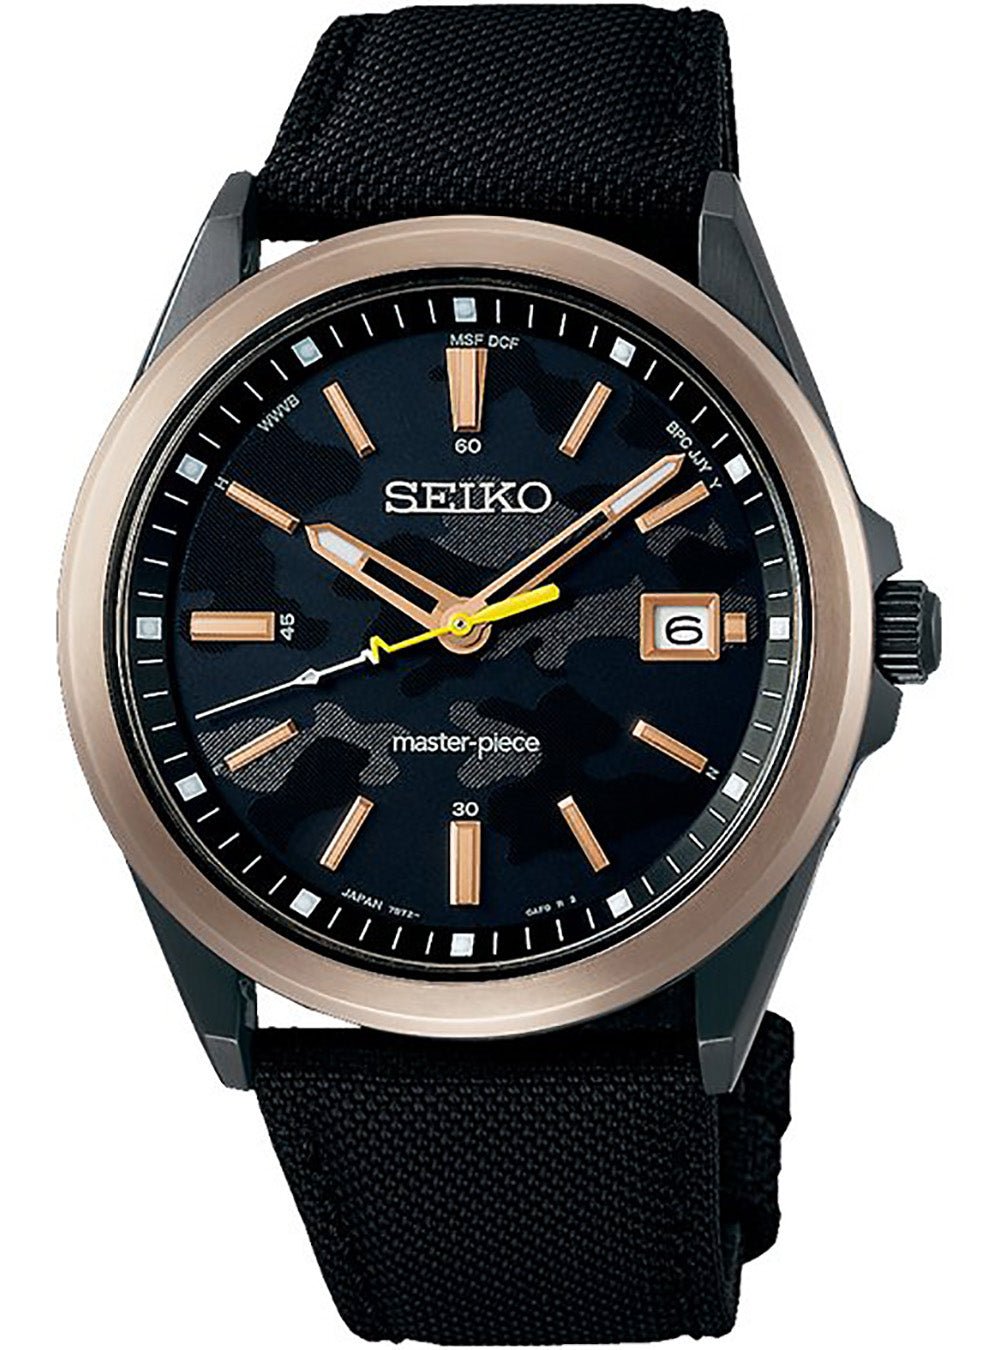 SEIKO SELECTION MASTER PIECE LIMITED EDITION SBTM316 MADE IN JAPAN JDMWRISTWATCHjapan-select